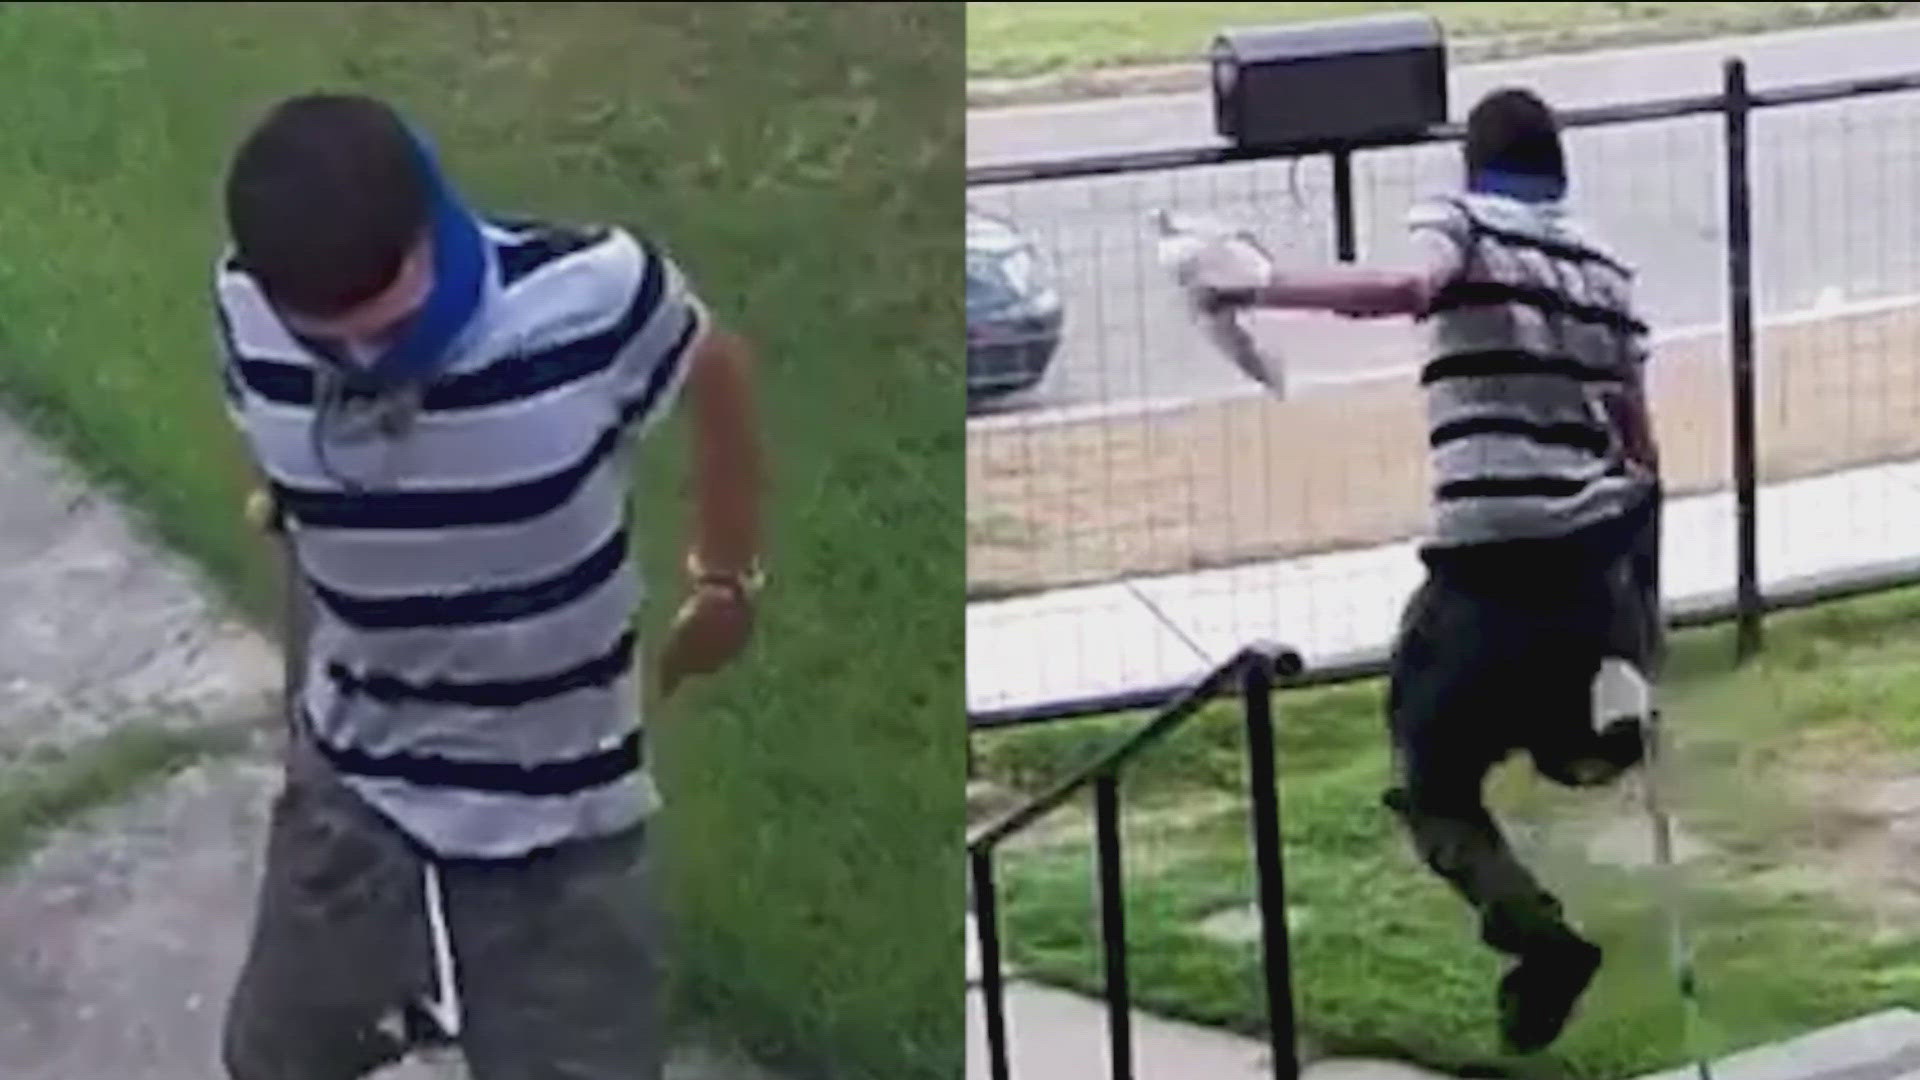 The San Antonio Police Department is currently on the look out for the porch pirate, who was caught on camera stealing various packages.